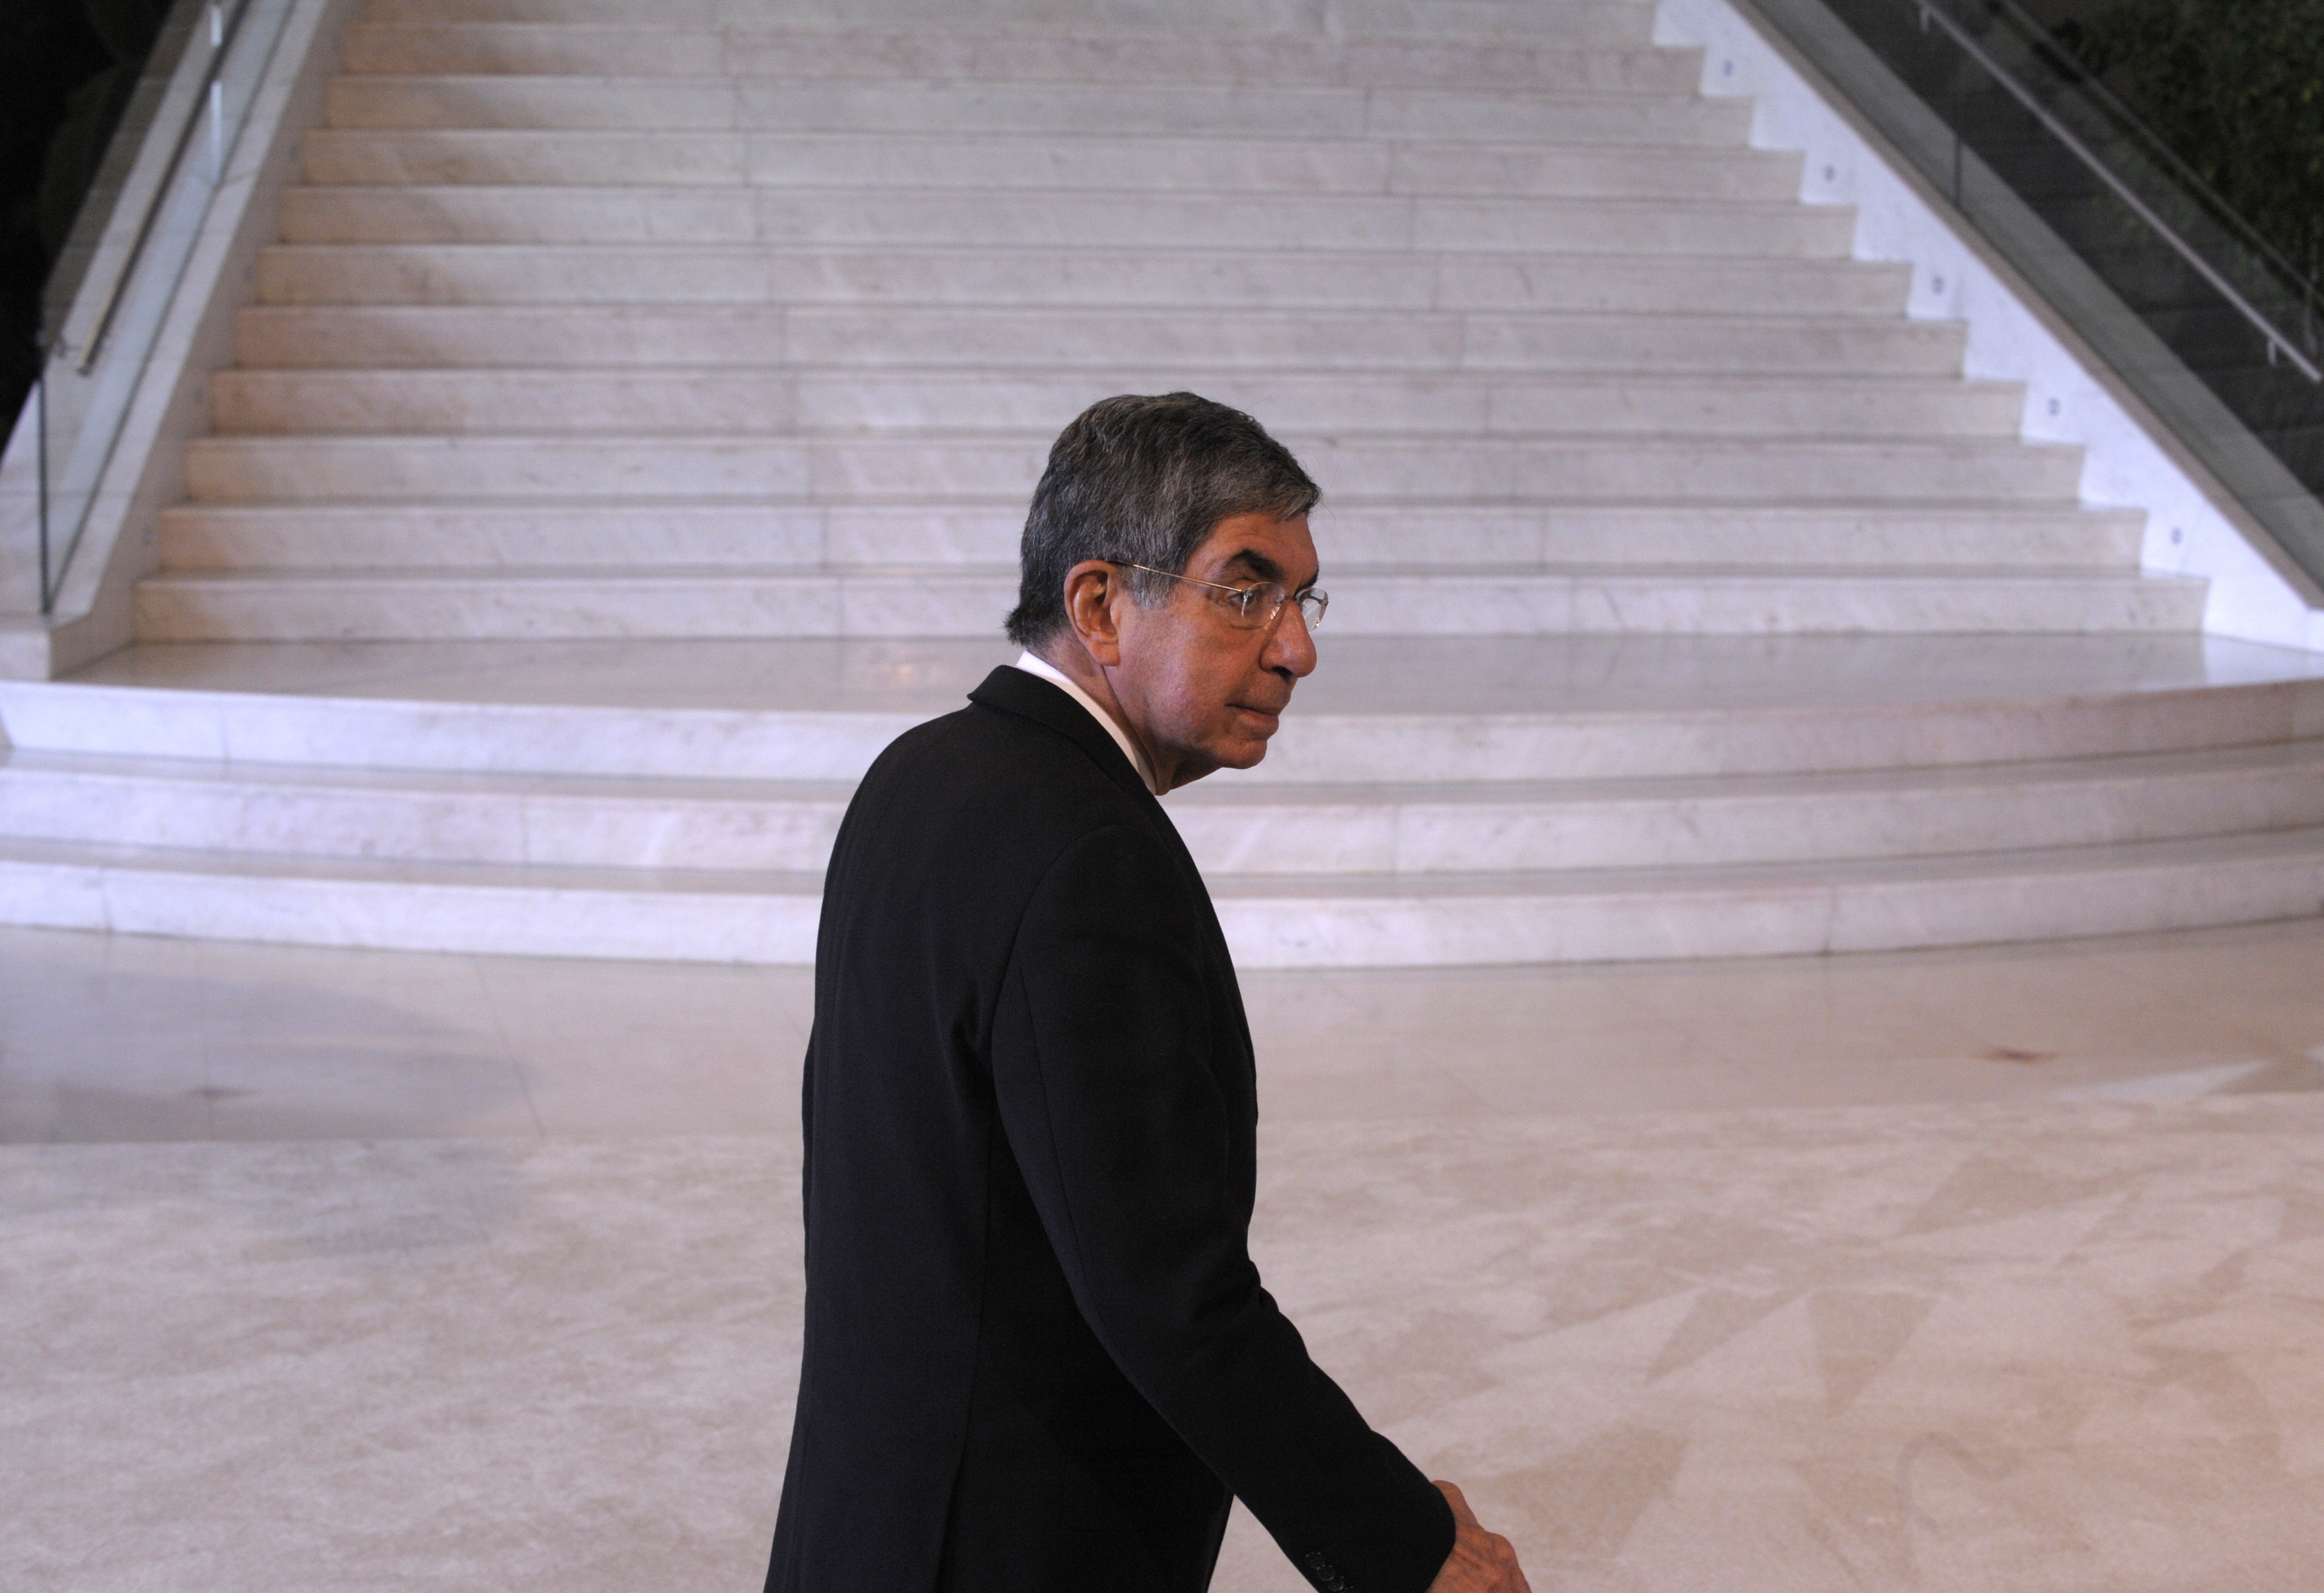 Costa Rica's President Oscar Arias Sanchez arrives for the start of the XIX Ibero-American Summit on November 30, 2009 in Estoril. Heads of state and government leaders of Portugal, Spain, Andorra and South American countries will gather in Estoril, outskirts of Lisbon, for the XIX Ibero-American Summit from November 29 to December 1, 2009. AFP PHOTO / MIGUEL RIOPA (Photo credit should read MIGUEL RIOPA/AFP/Getty Images)